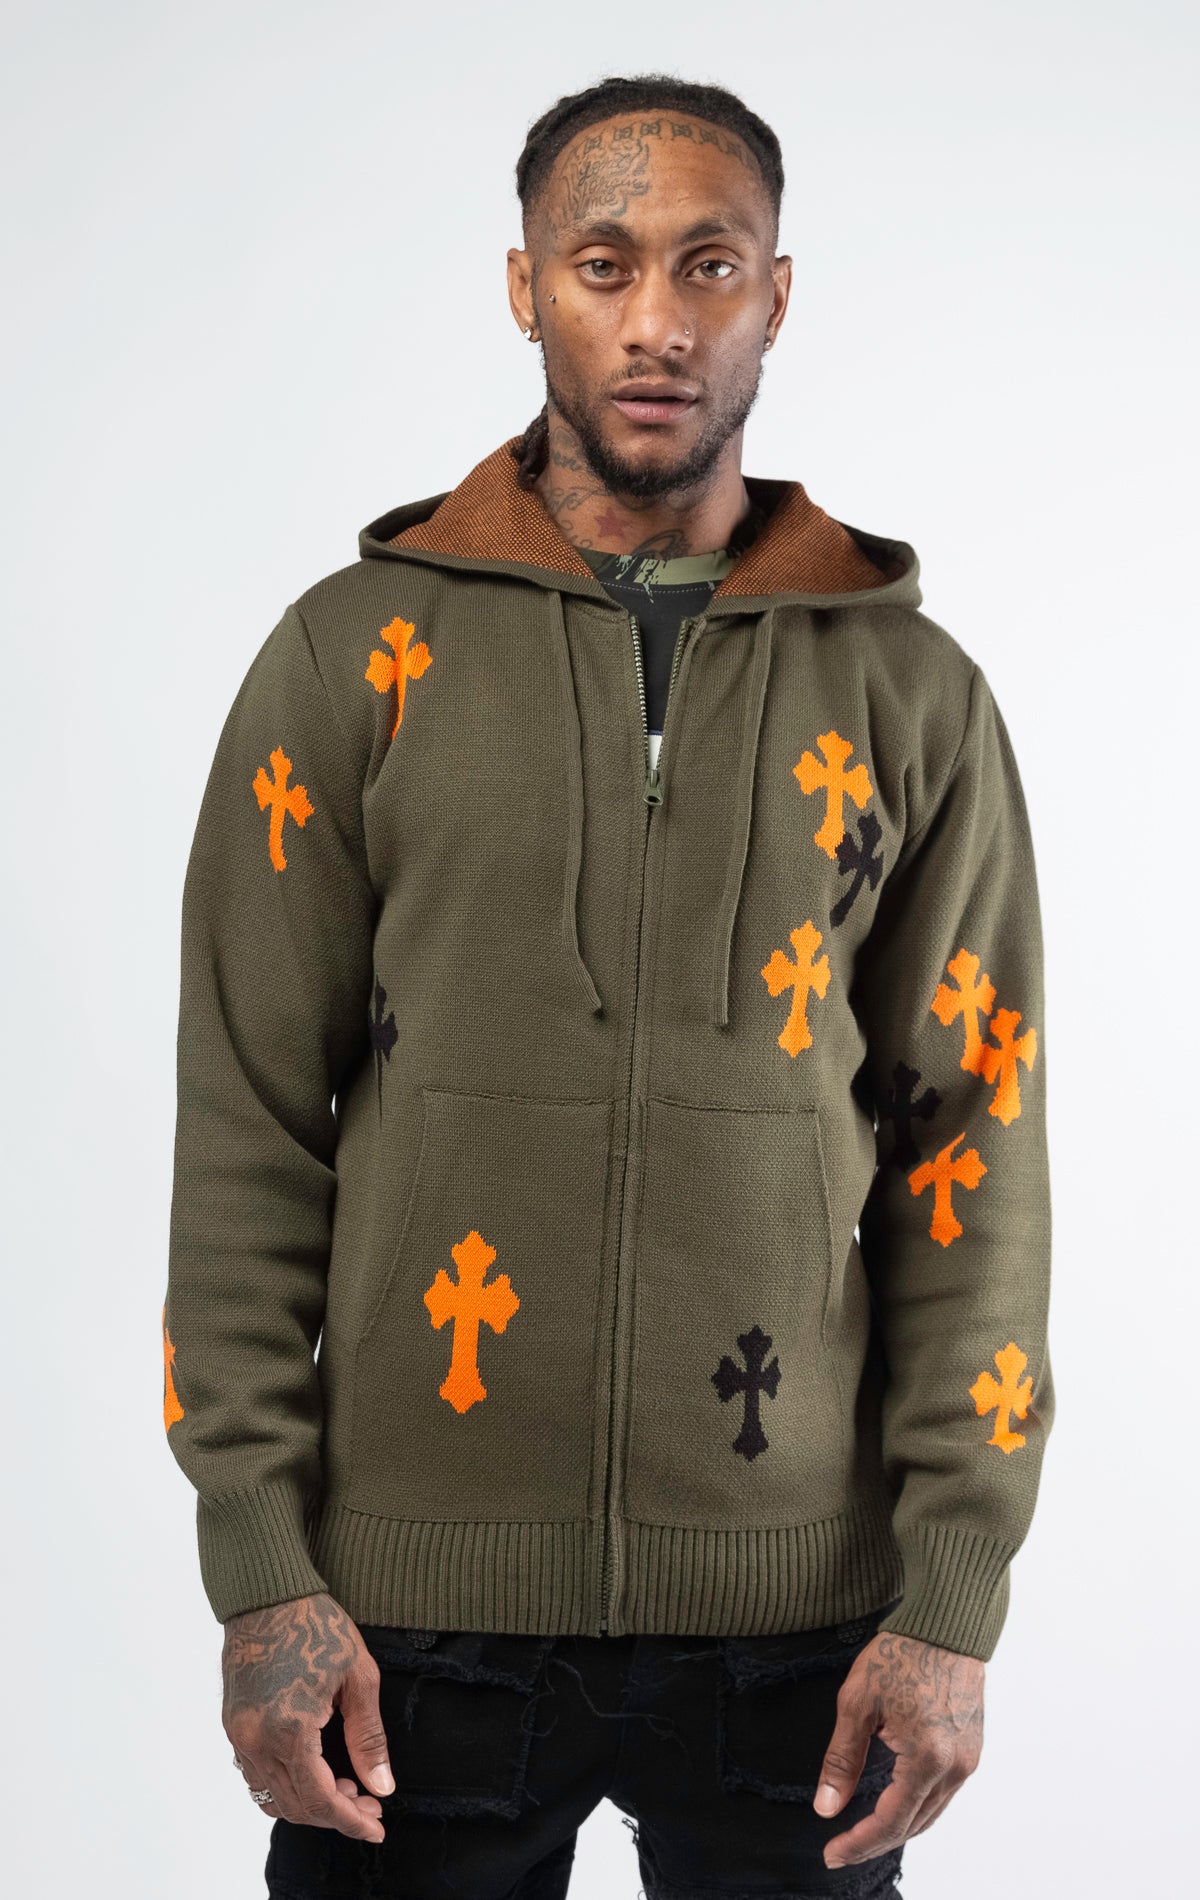 A stylish and comfortable olive zip-up hoodie featuring a soft knitted fabric, relaxed fit, full-zip closure, two spacious kangaroo pockets, and a rich olive color.